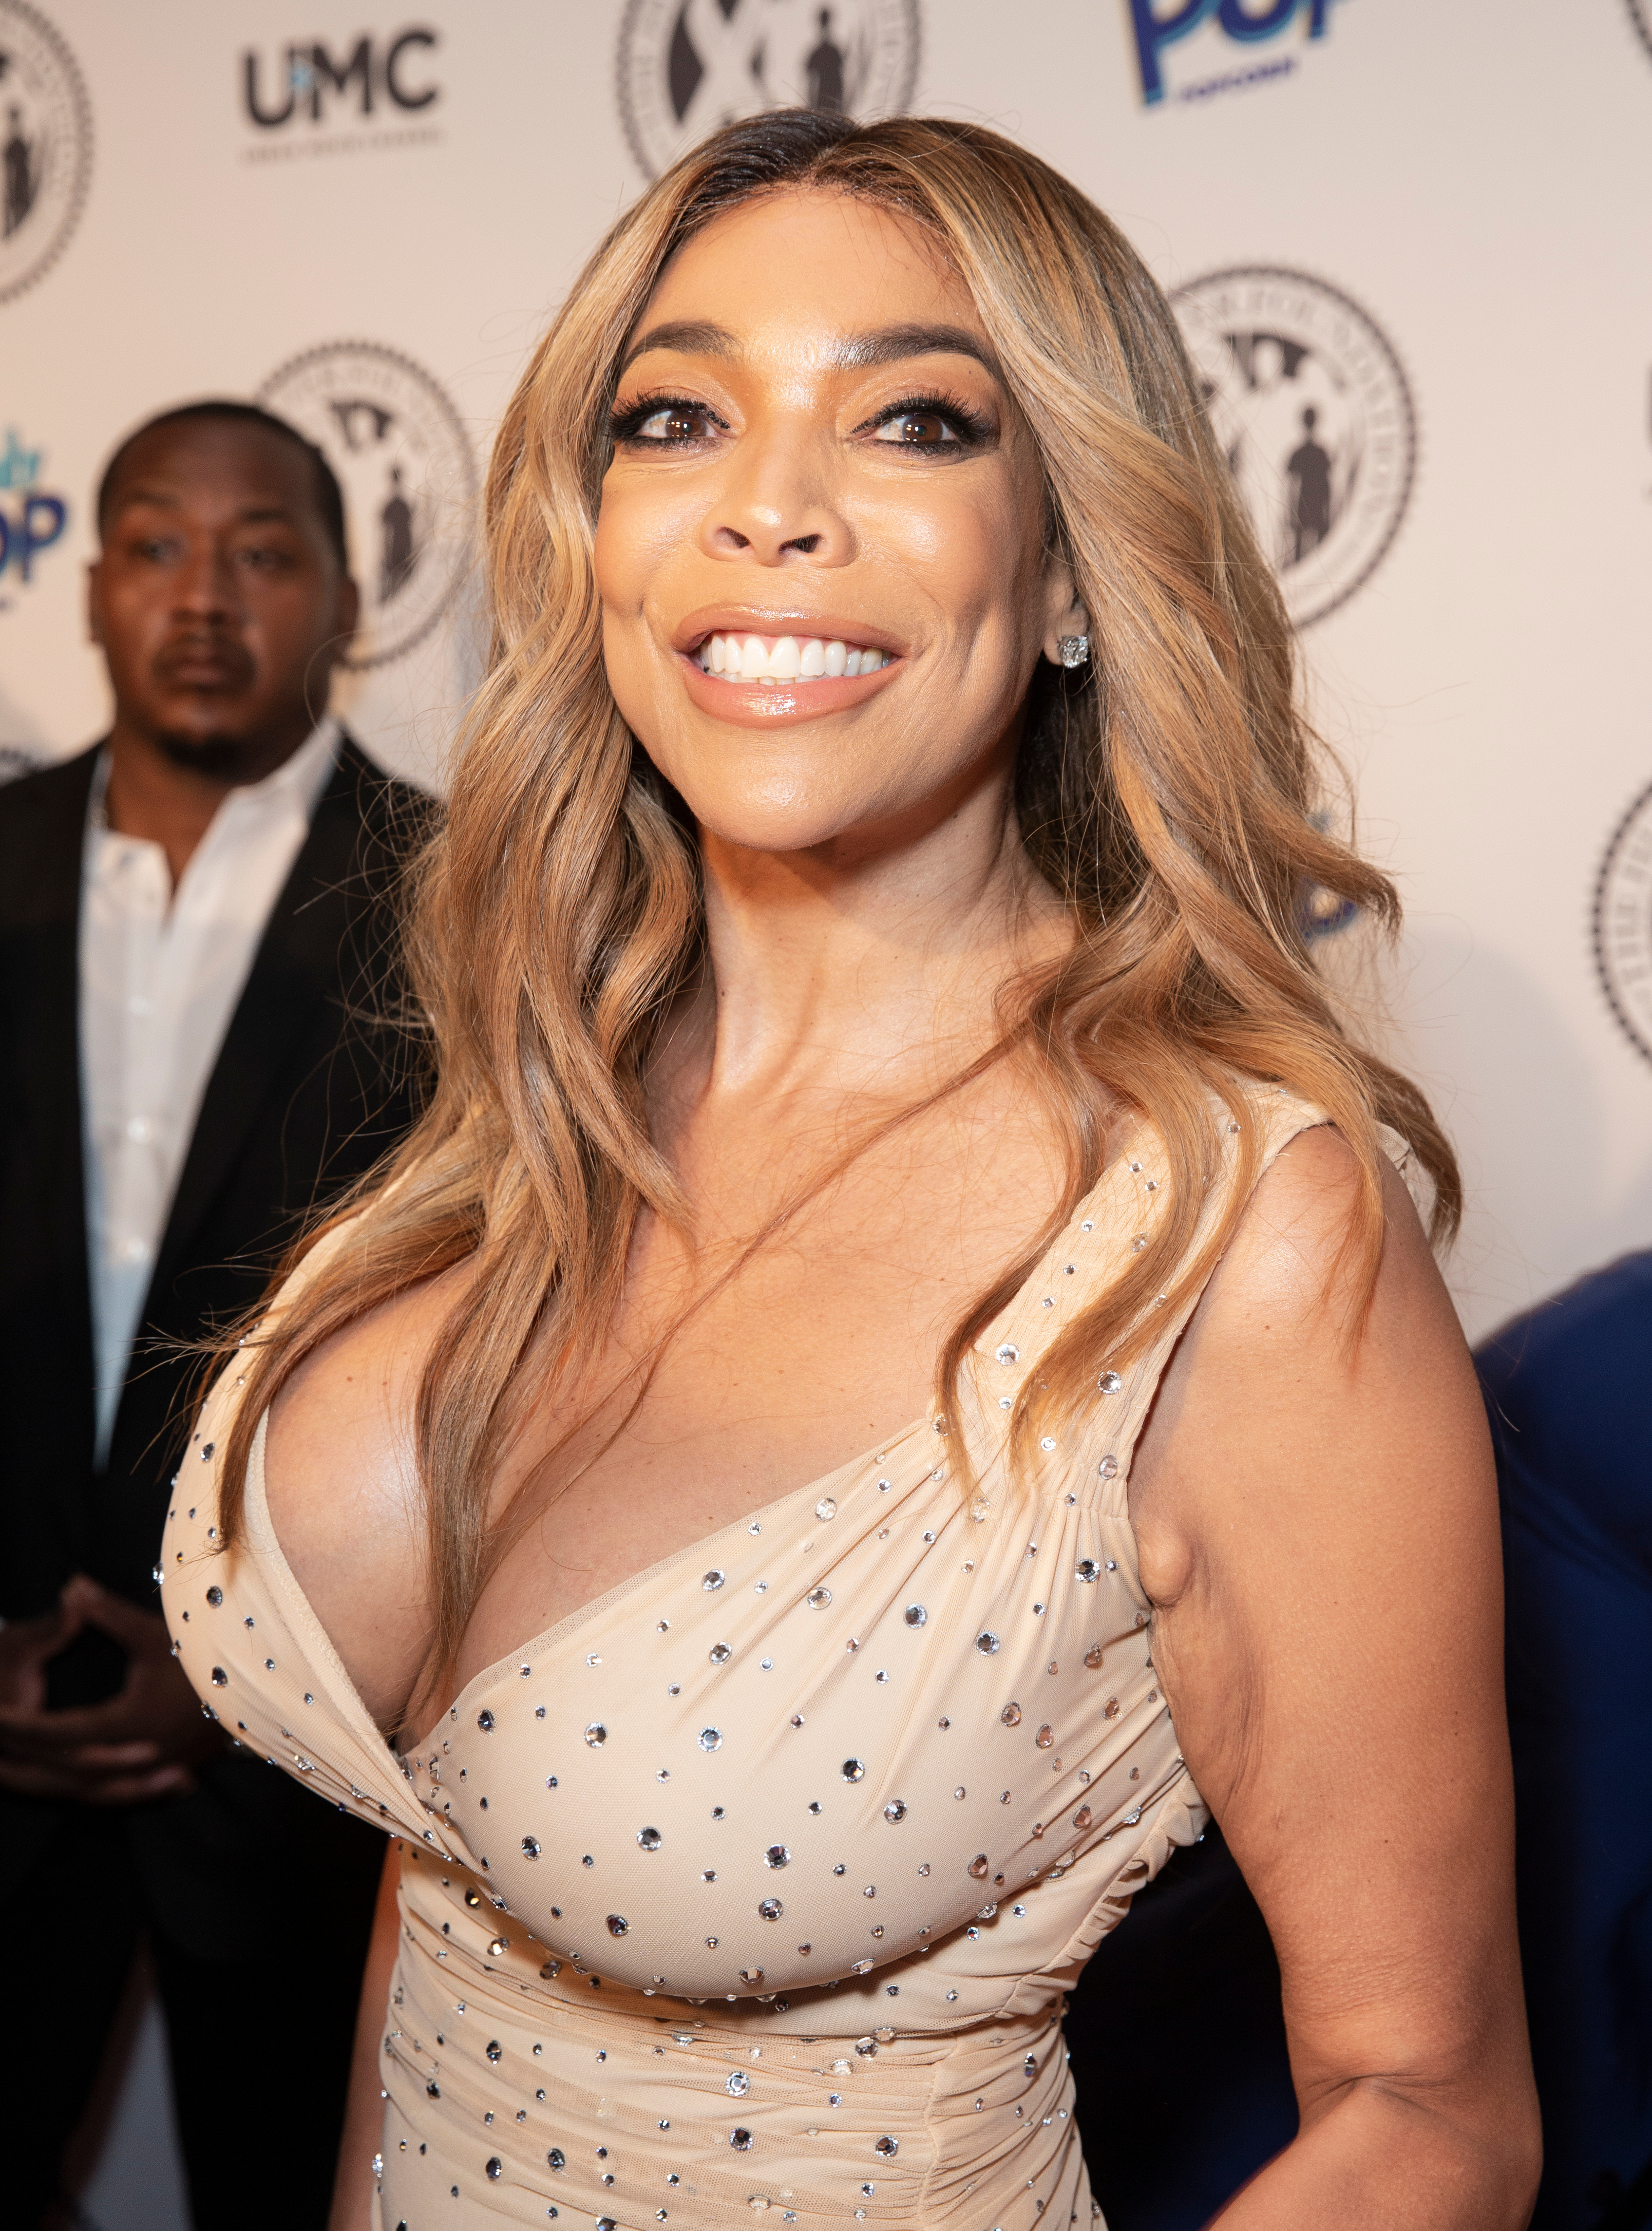 Wendy Williams looks insanely gorgeous in this brown dress designed with silver stones, that leaves nothing to imagination.